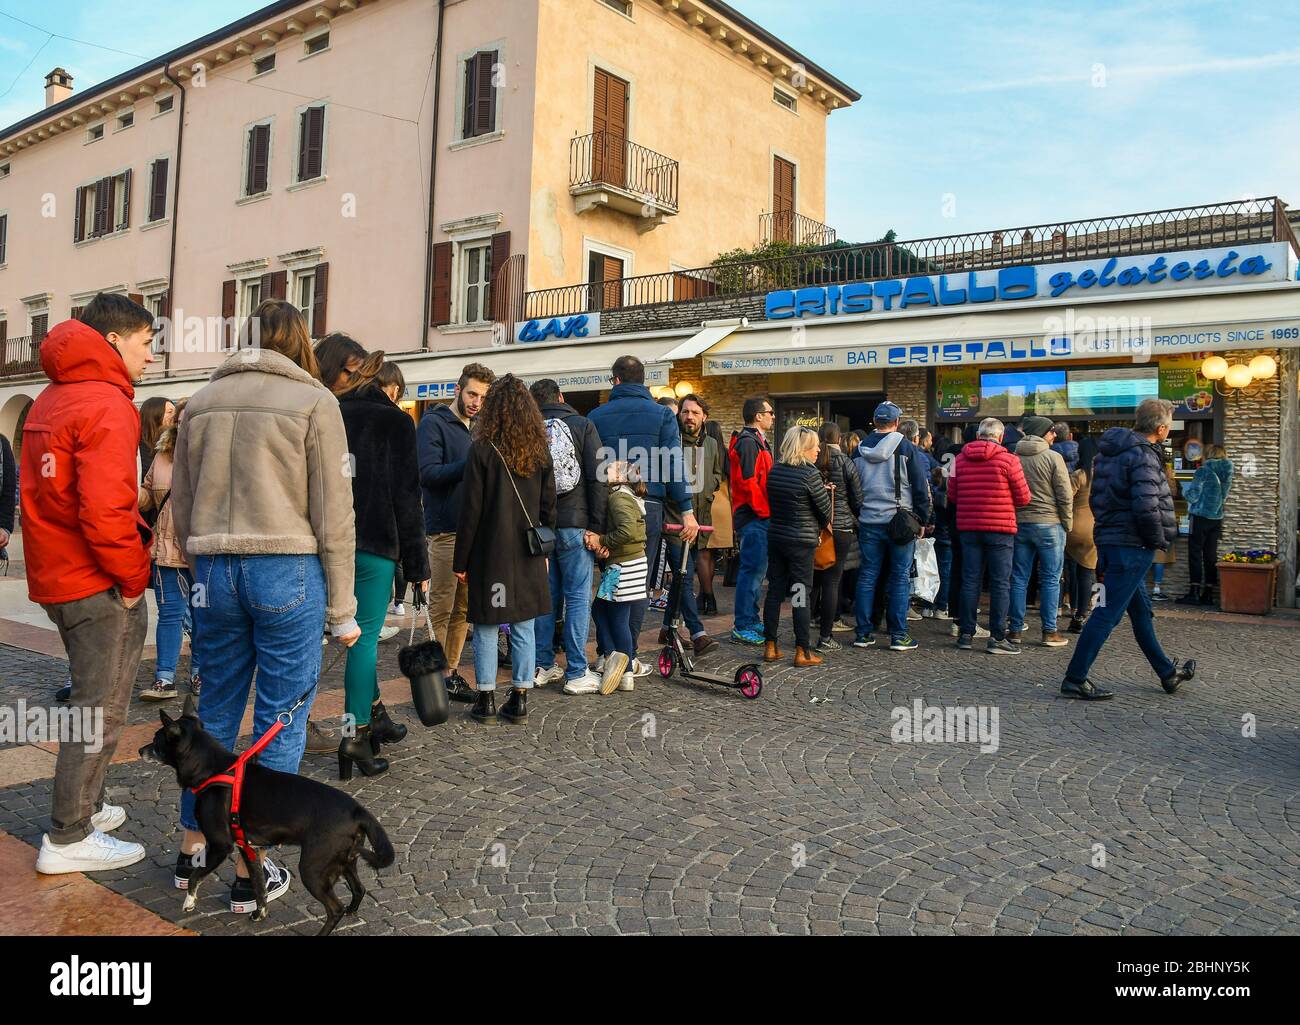 A lot of people standing in line waiting to buy ice cream outside an ice cream shop in the old town of Bardolino, Lake Garda, Verona, Veneto, Italy Stock Photo